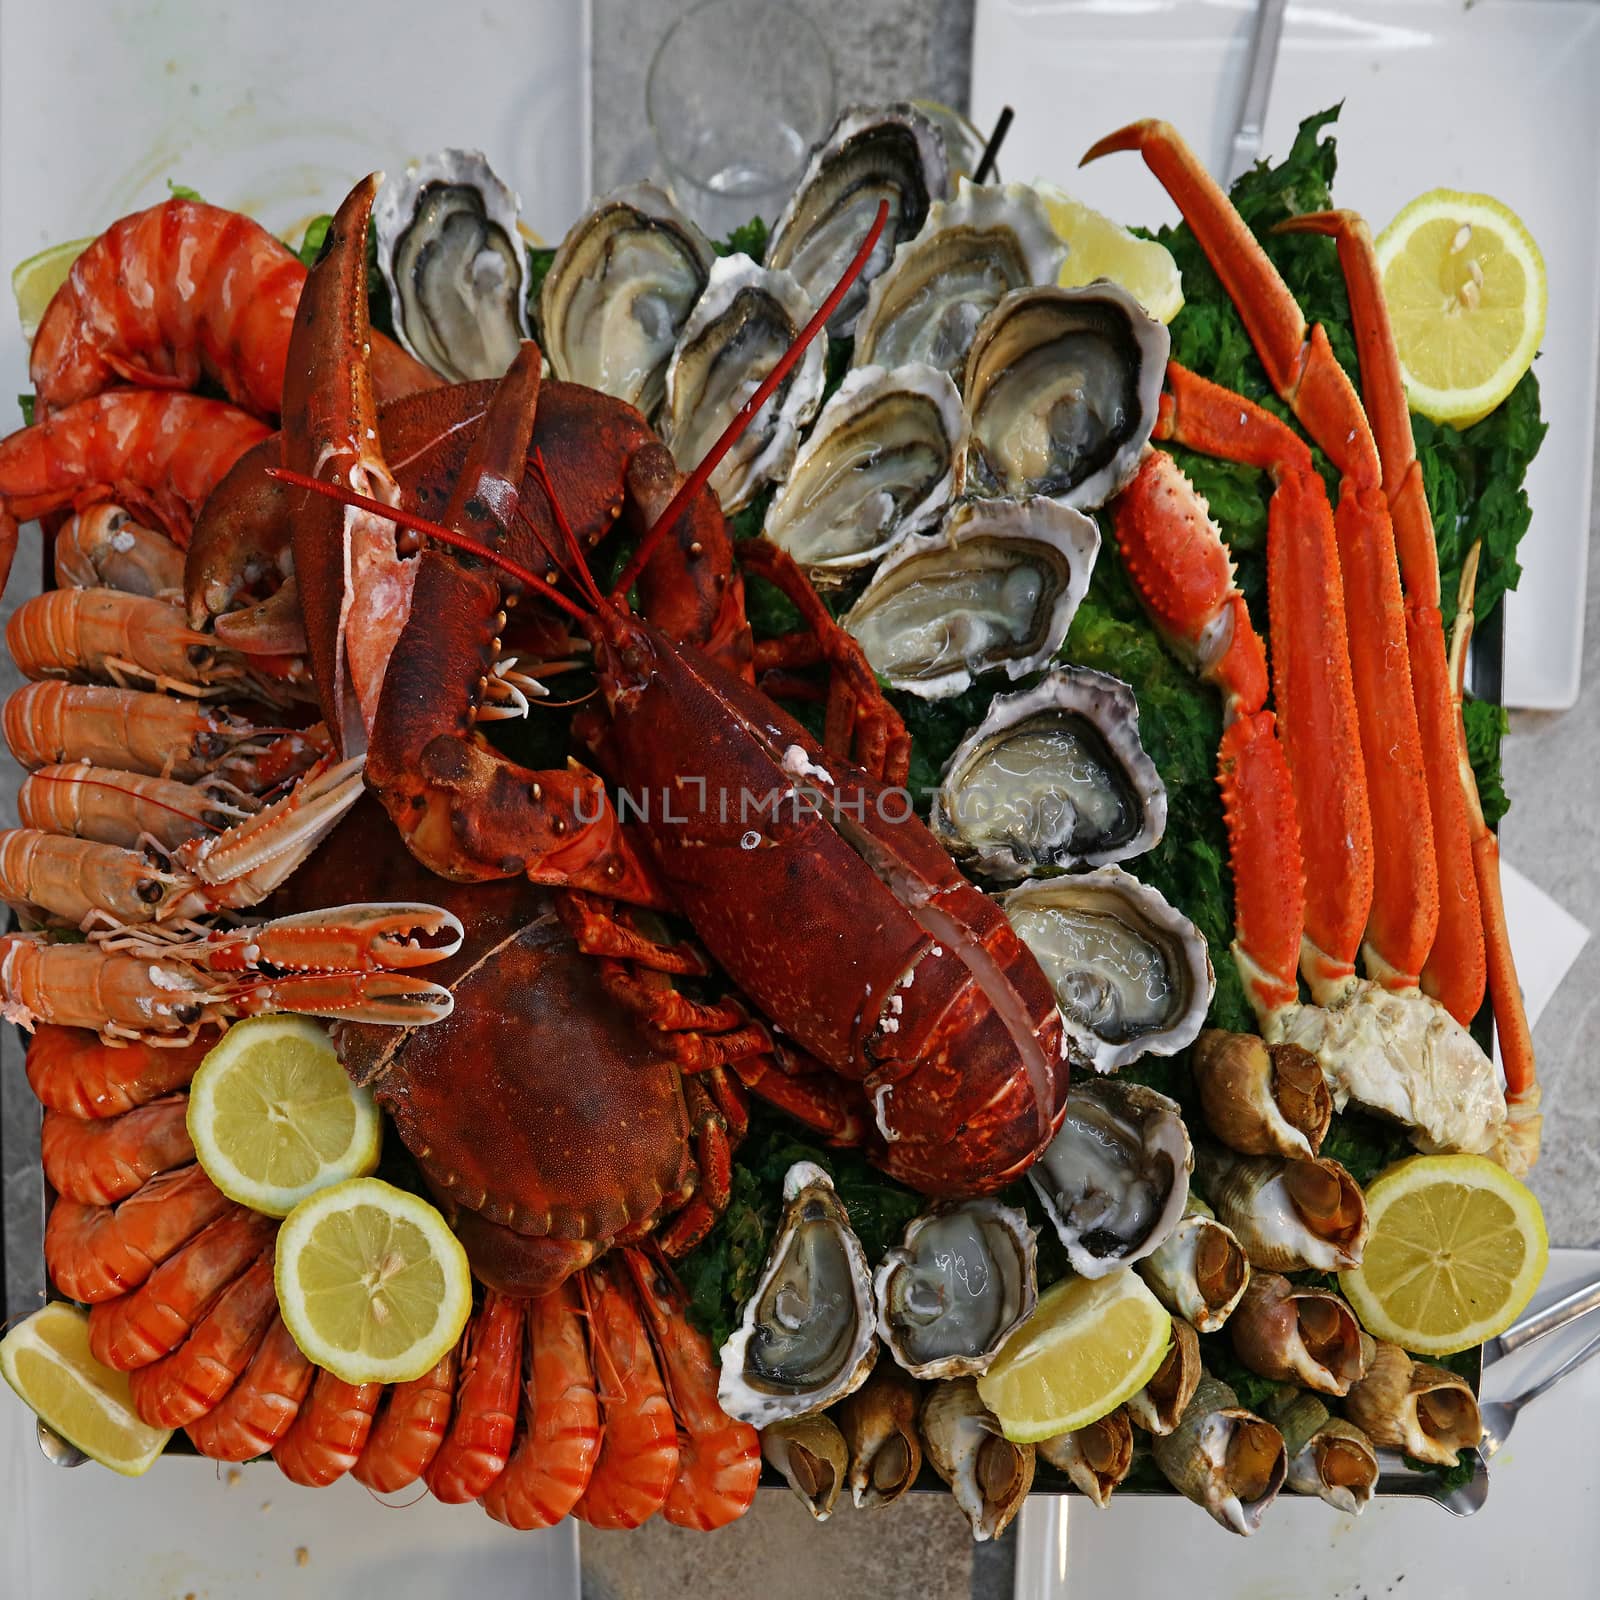 Large cold and raw seafood platter to share by BreakingTheWalls